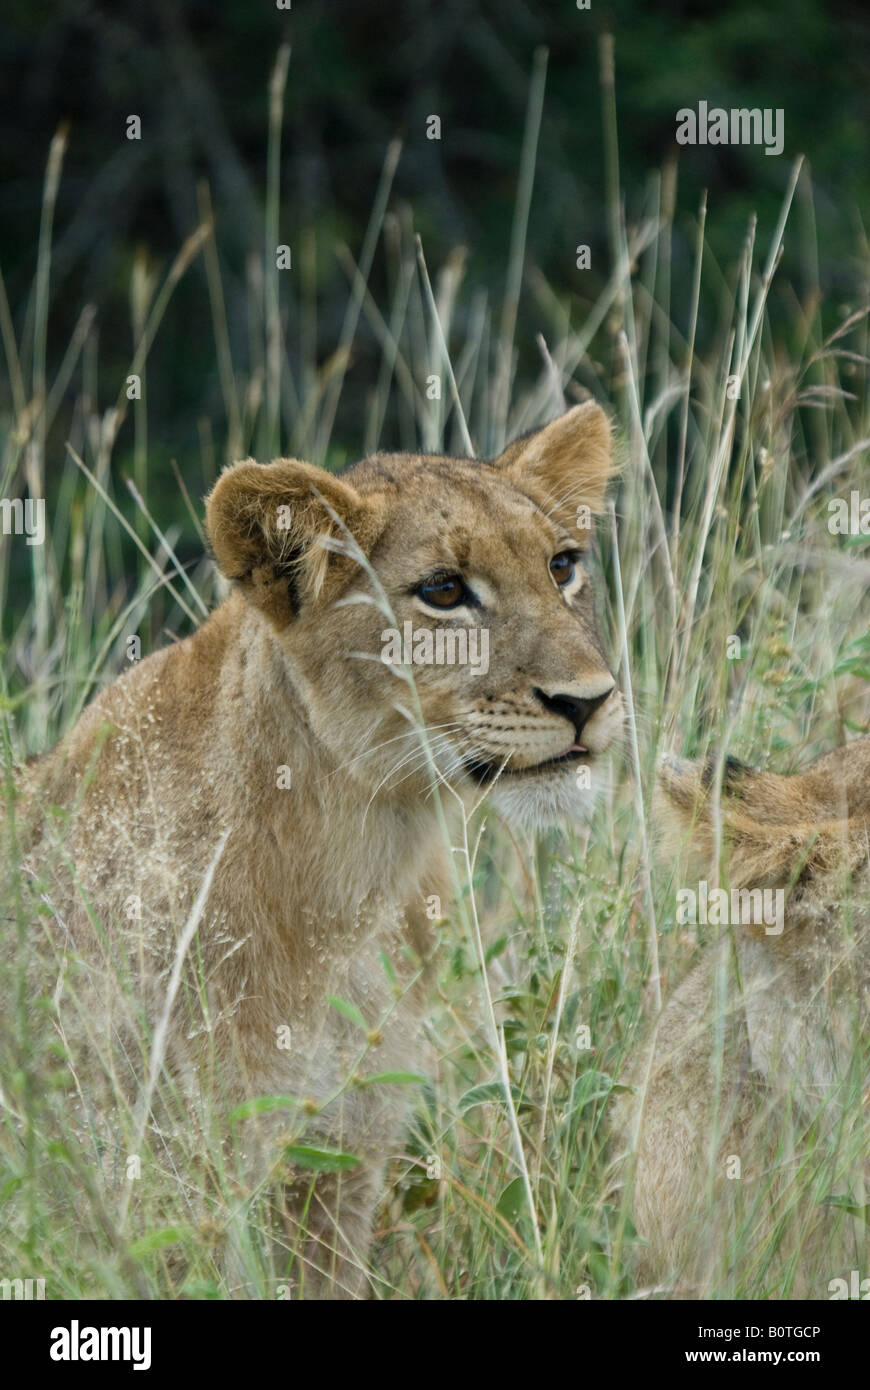 A young lion cub in the long grass Stock Photo